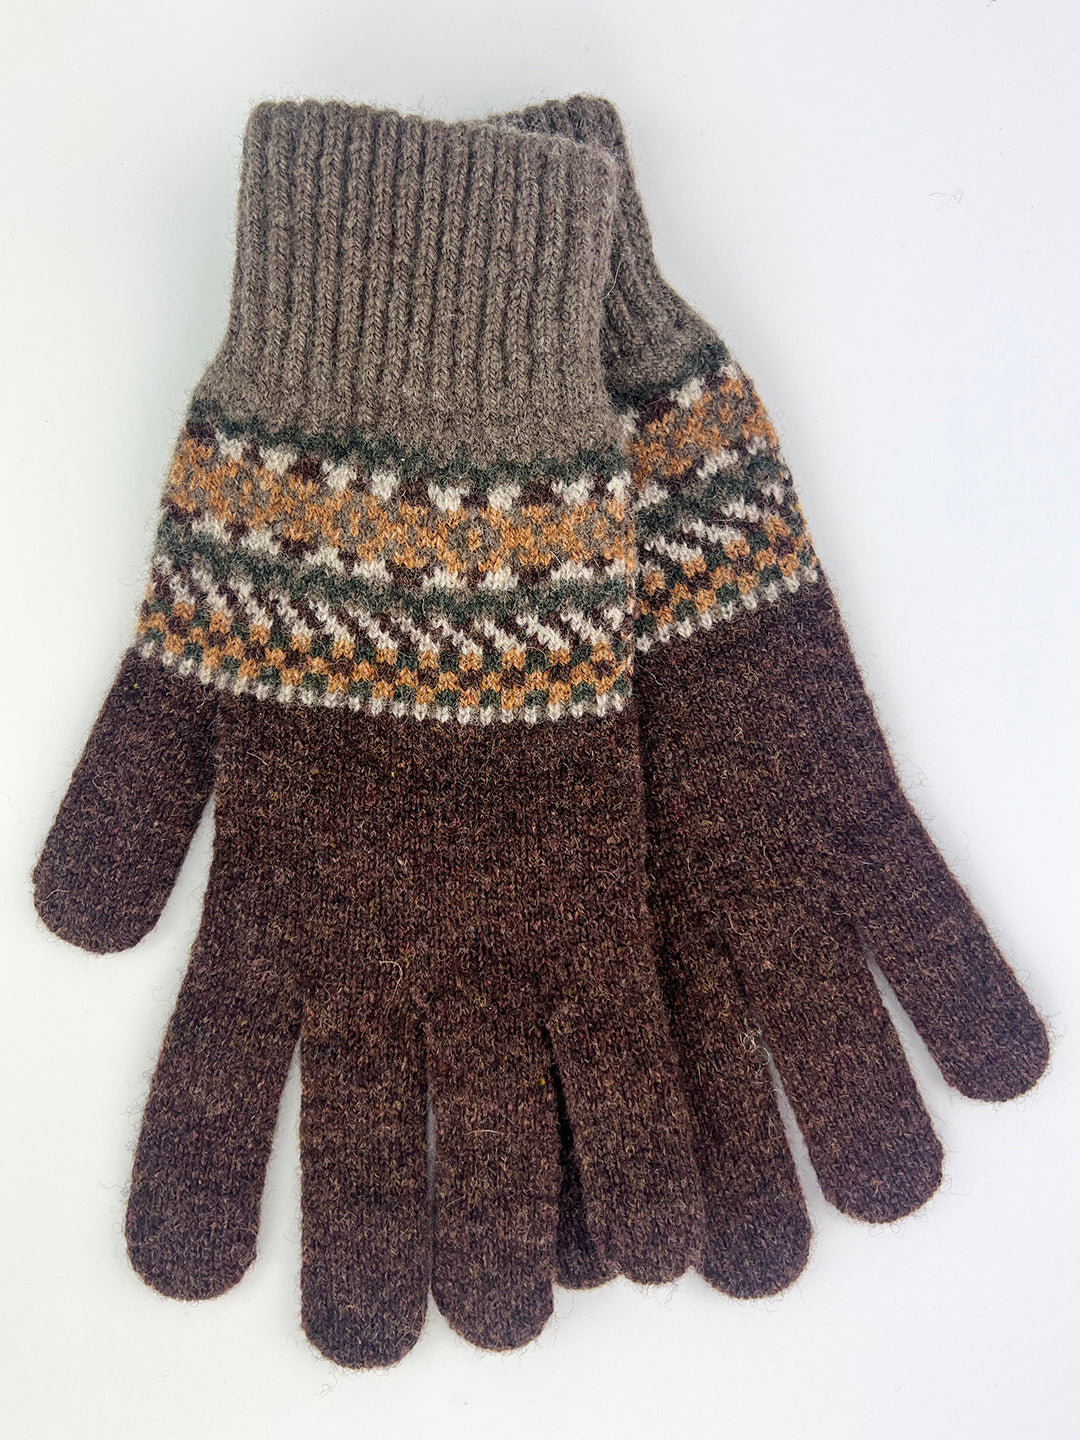 knitted patterned gloves in Loam colour way, Knitted in Scotland